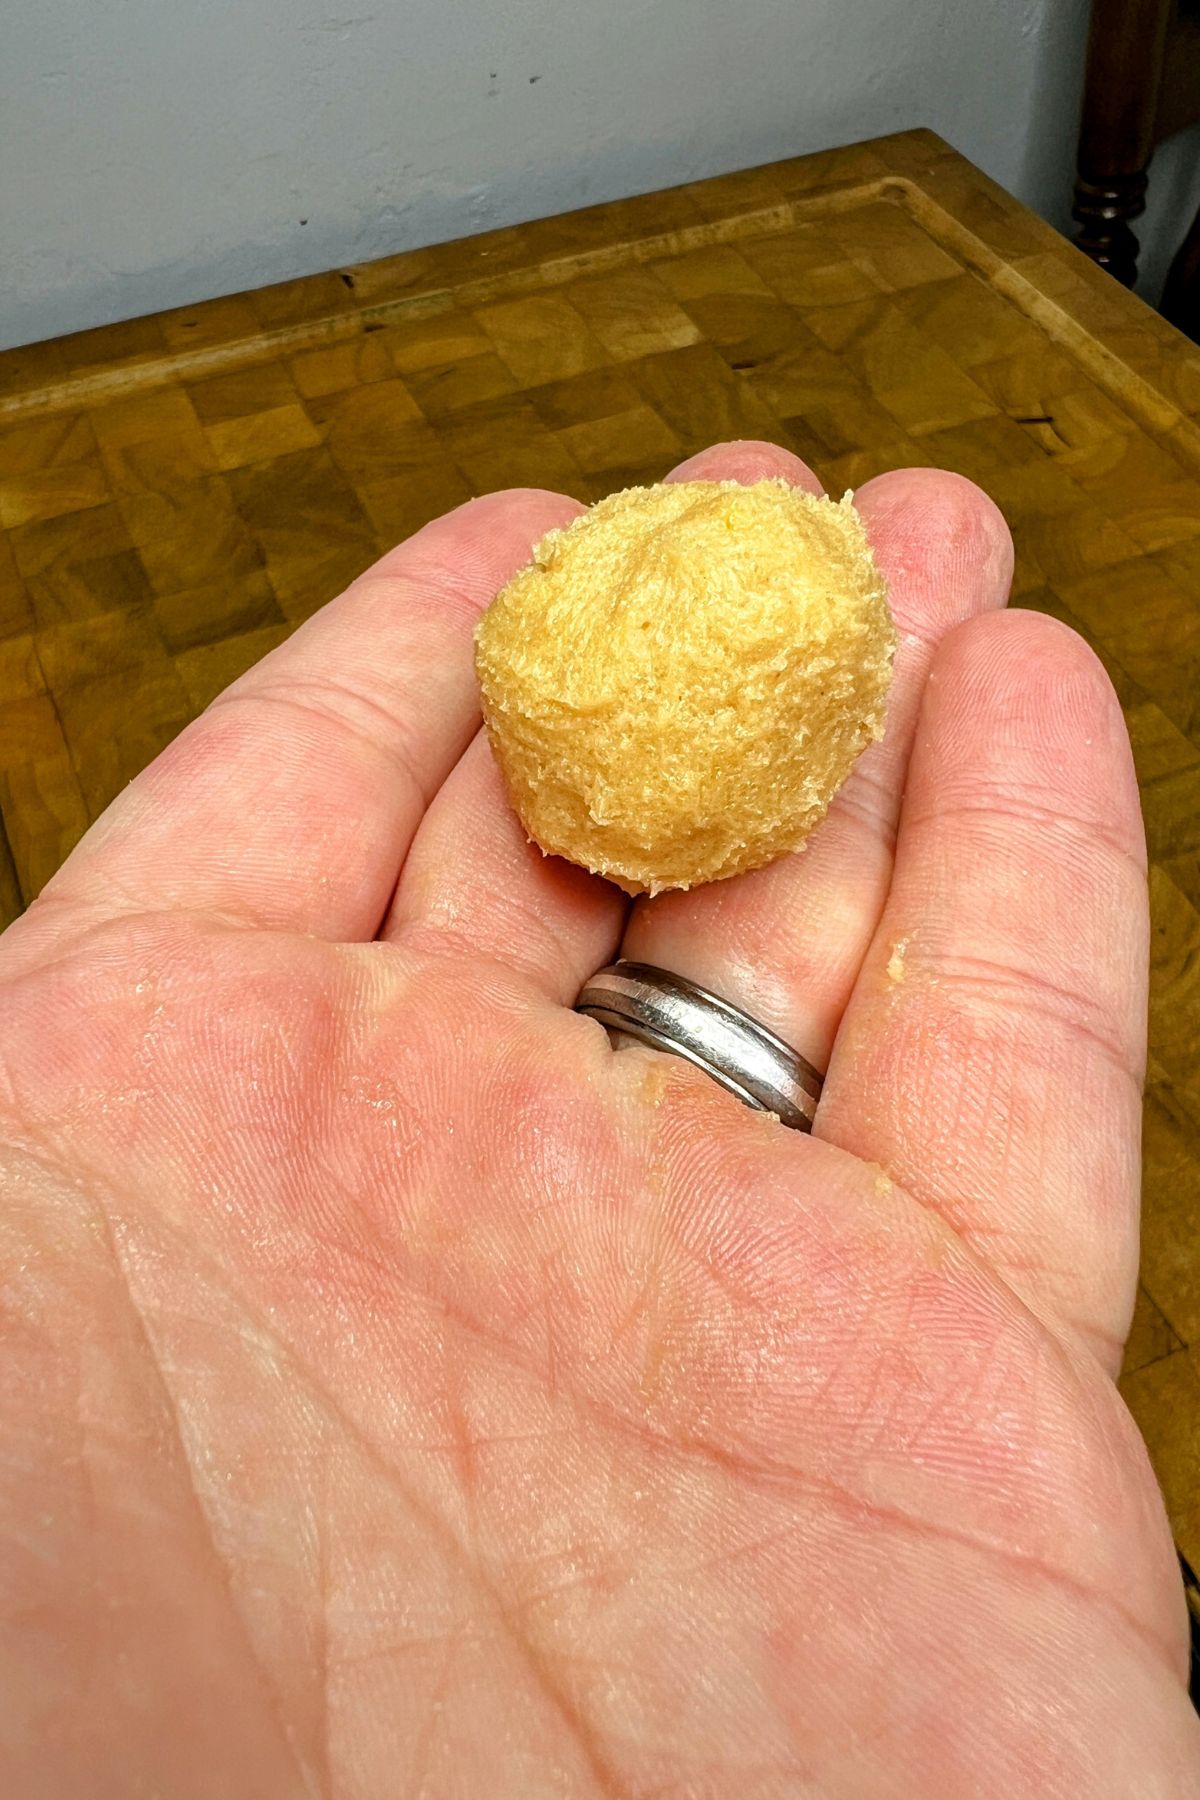 Pancake mix cookie dough ball in a hand.